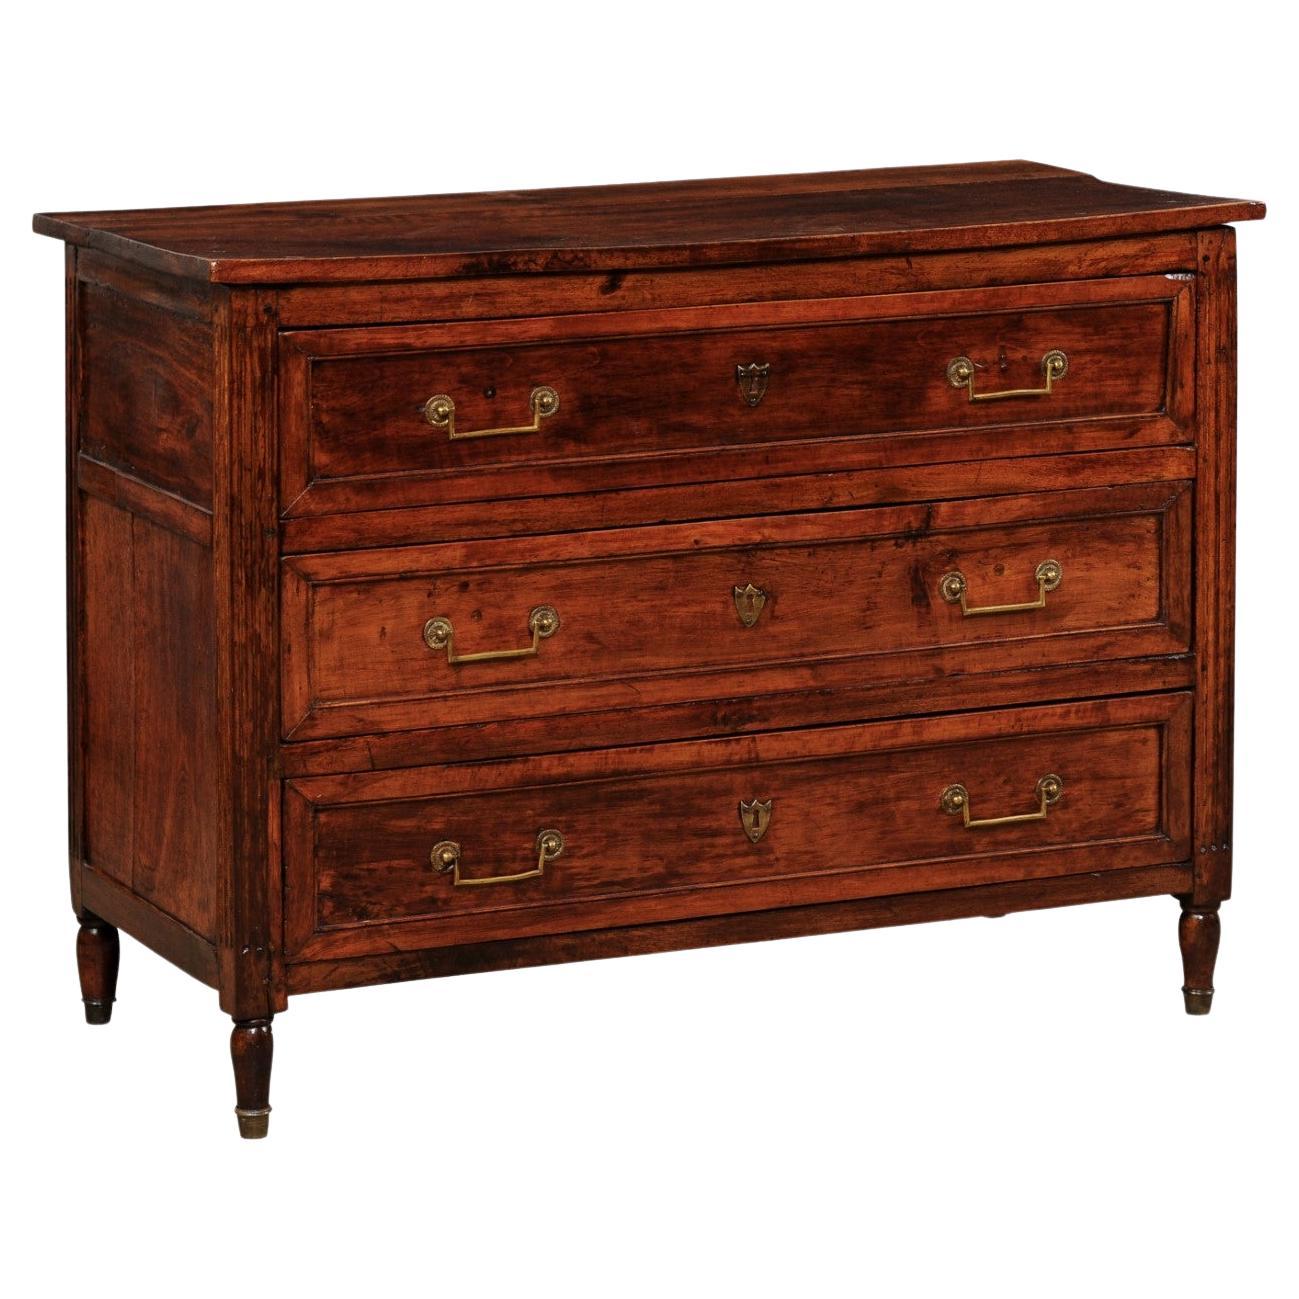 Early 19th C. French Fruitwood Chest Designed w/Clean Lines & Neoclassic Touches